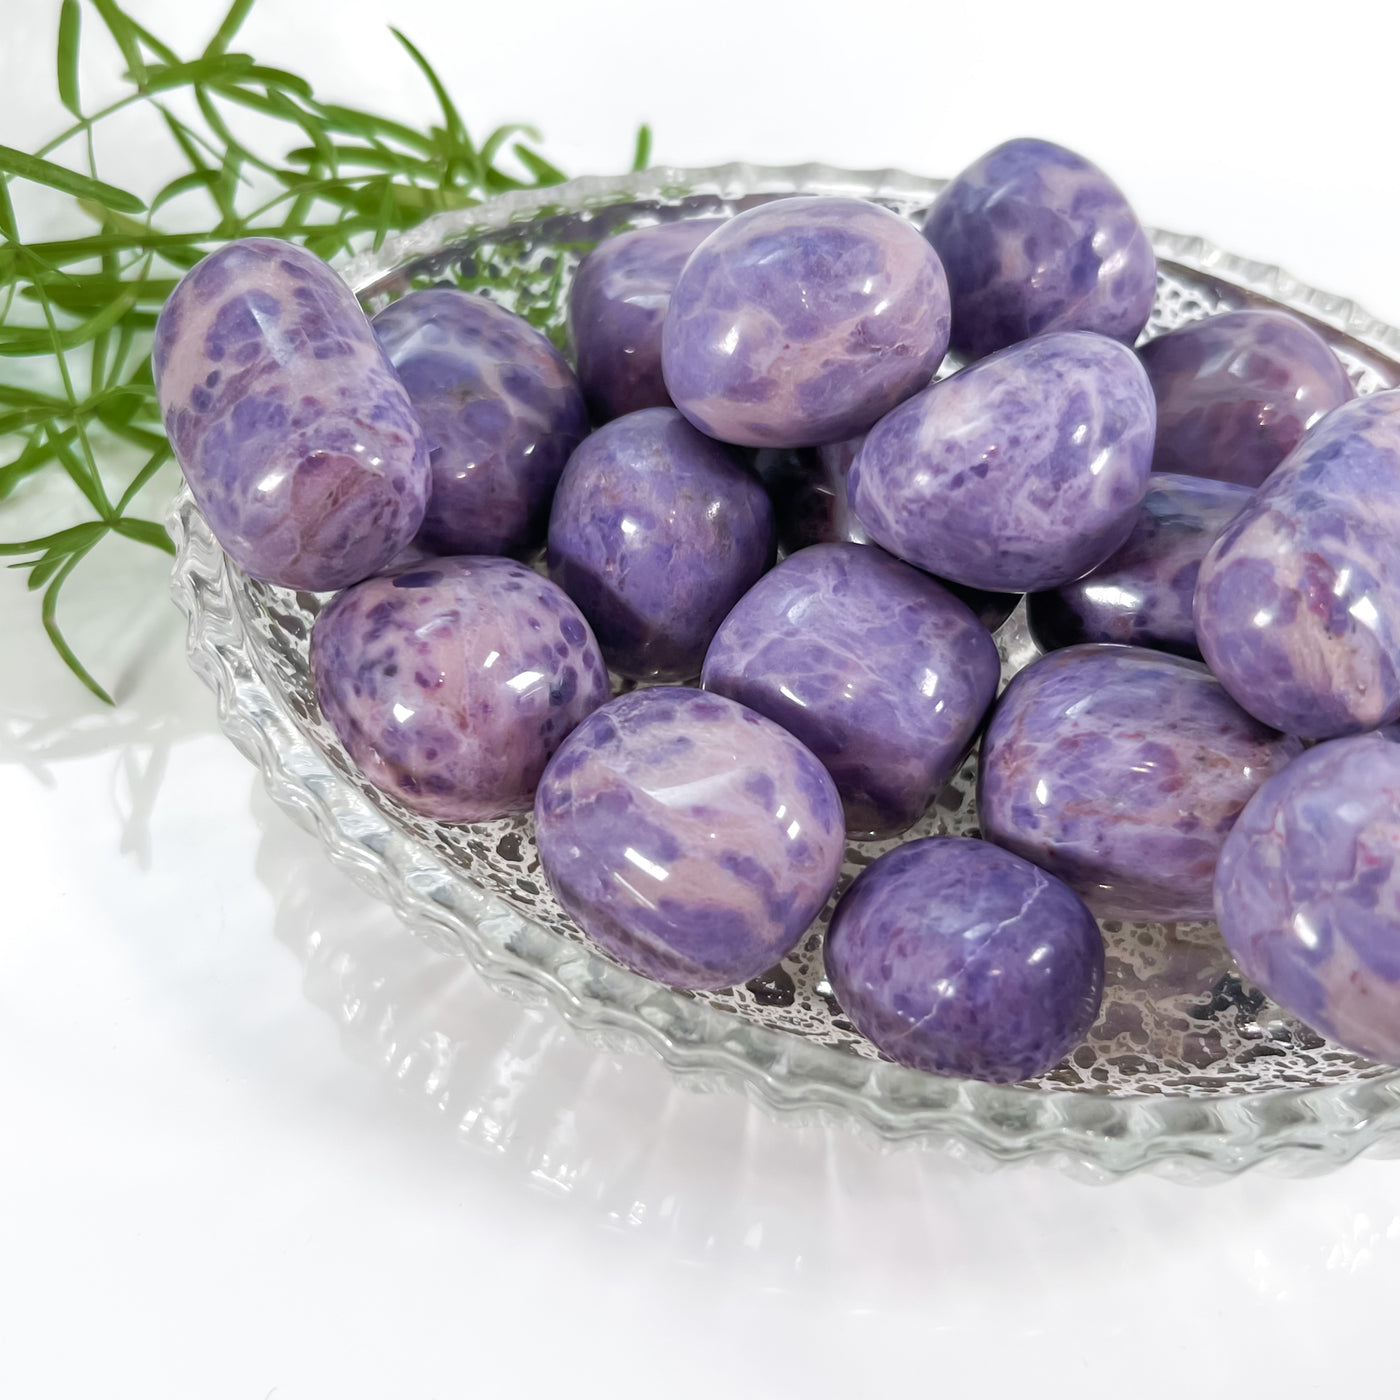 Rare Find Purple Jade for Aura Protection